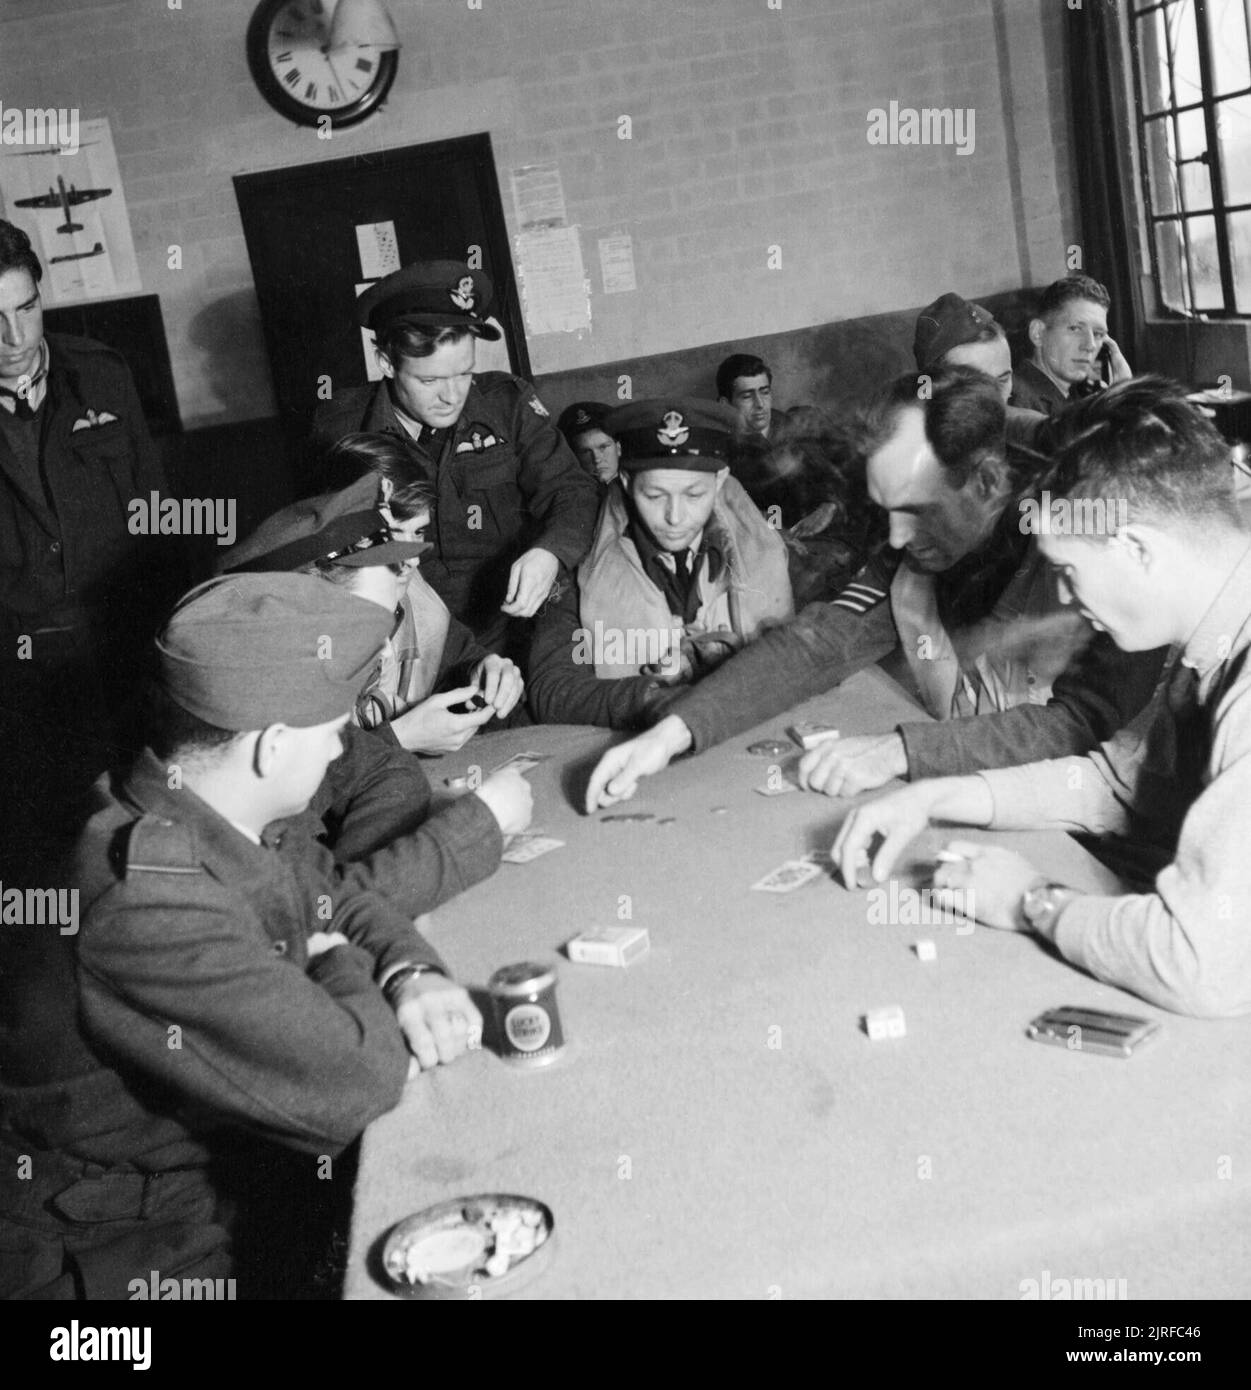 American volunteer pilots of No.121 (Eagle) Sqaudron playing poker in the dispersal hut at RAF Rochford in Essex during August 1942. In the Pilots' Dispersal Hut at Rochford airfield, personnel of No 121 (Eagle) Squadron play Poker as they await the order to 'scramble'. Left to right they are: Pilot Officer Beatie (standing, from Georgia), Pilot Officer Heppel (New Jersey), Pilot Officer Kearney (New Mexico), Flight Sergeant Blandy (South Carolina), Flight Sergeant Carpenter (standing, from Pennsylvania), Flight Officer Hasey (Oklahoma), Flight Sergeant Sanders (Tennessee) and Flight Sergeant Stock Photo